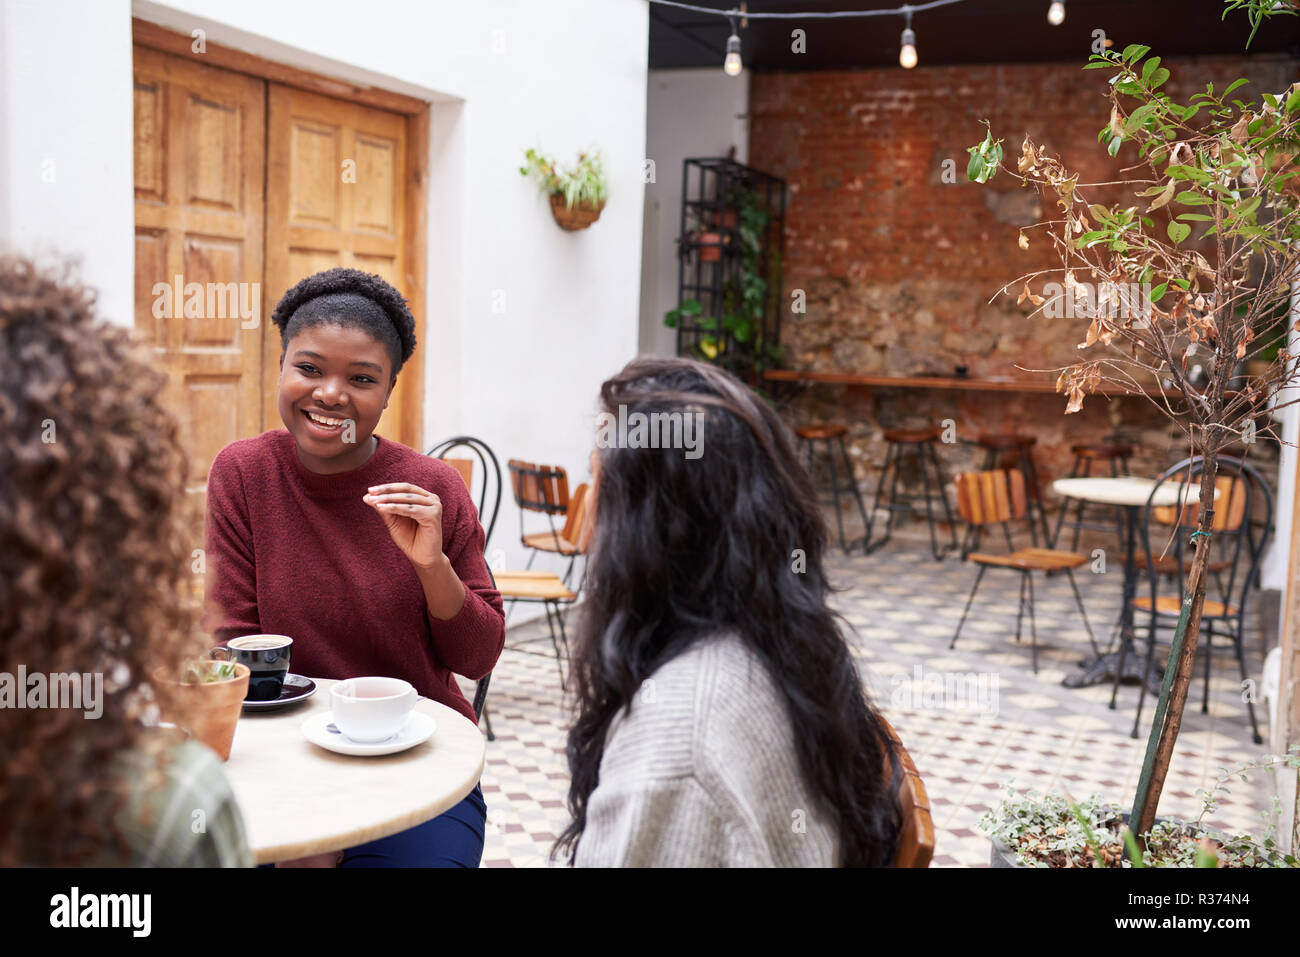 Female friends chatting over drinks in a trendy cafe courtyard Stock Photo